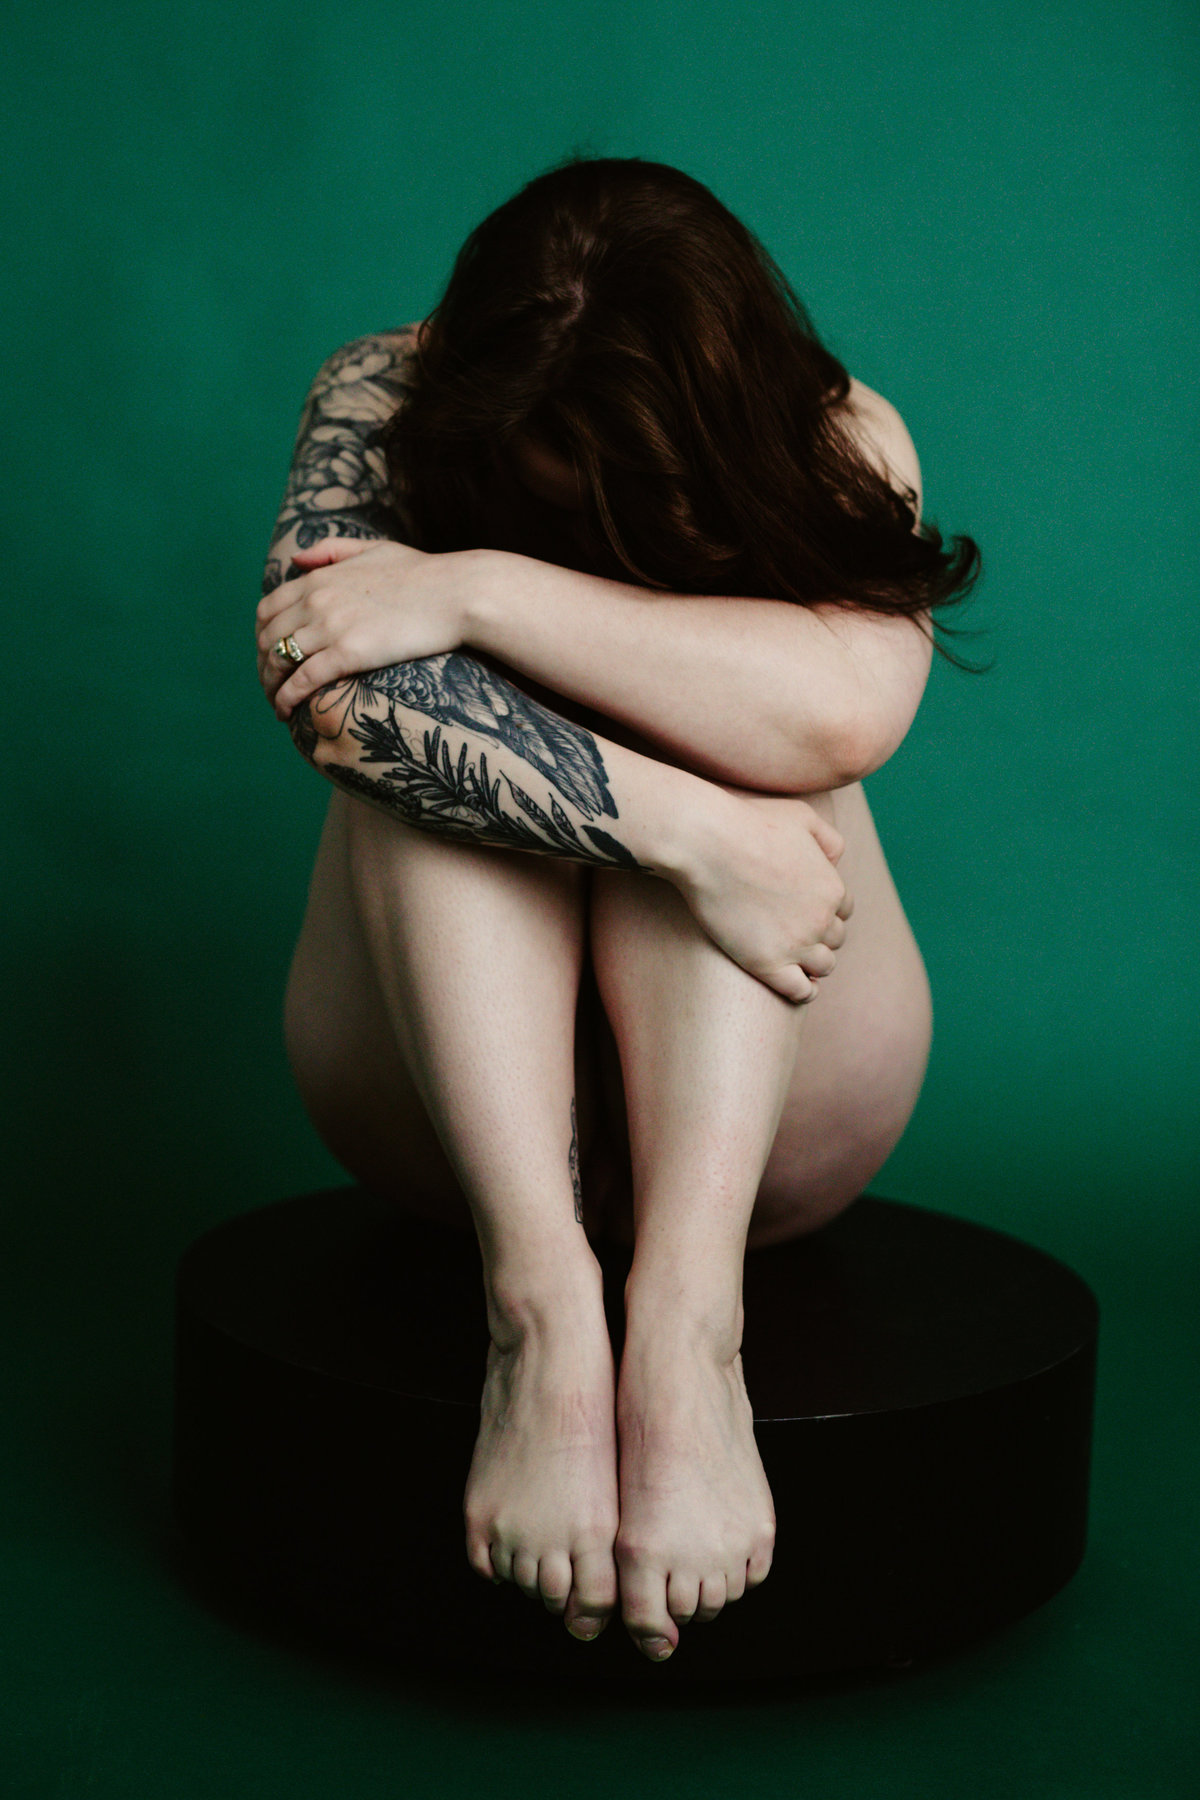 tattood woman folded over her body on green background